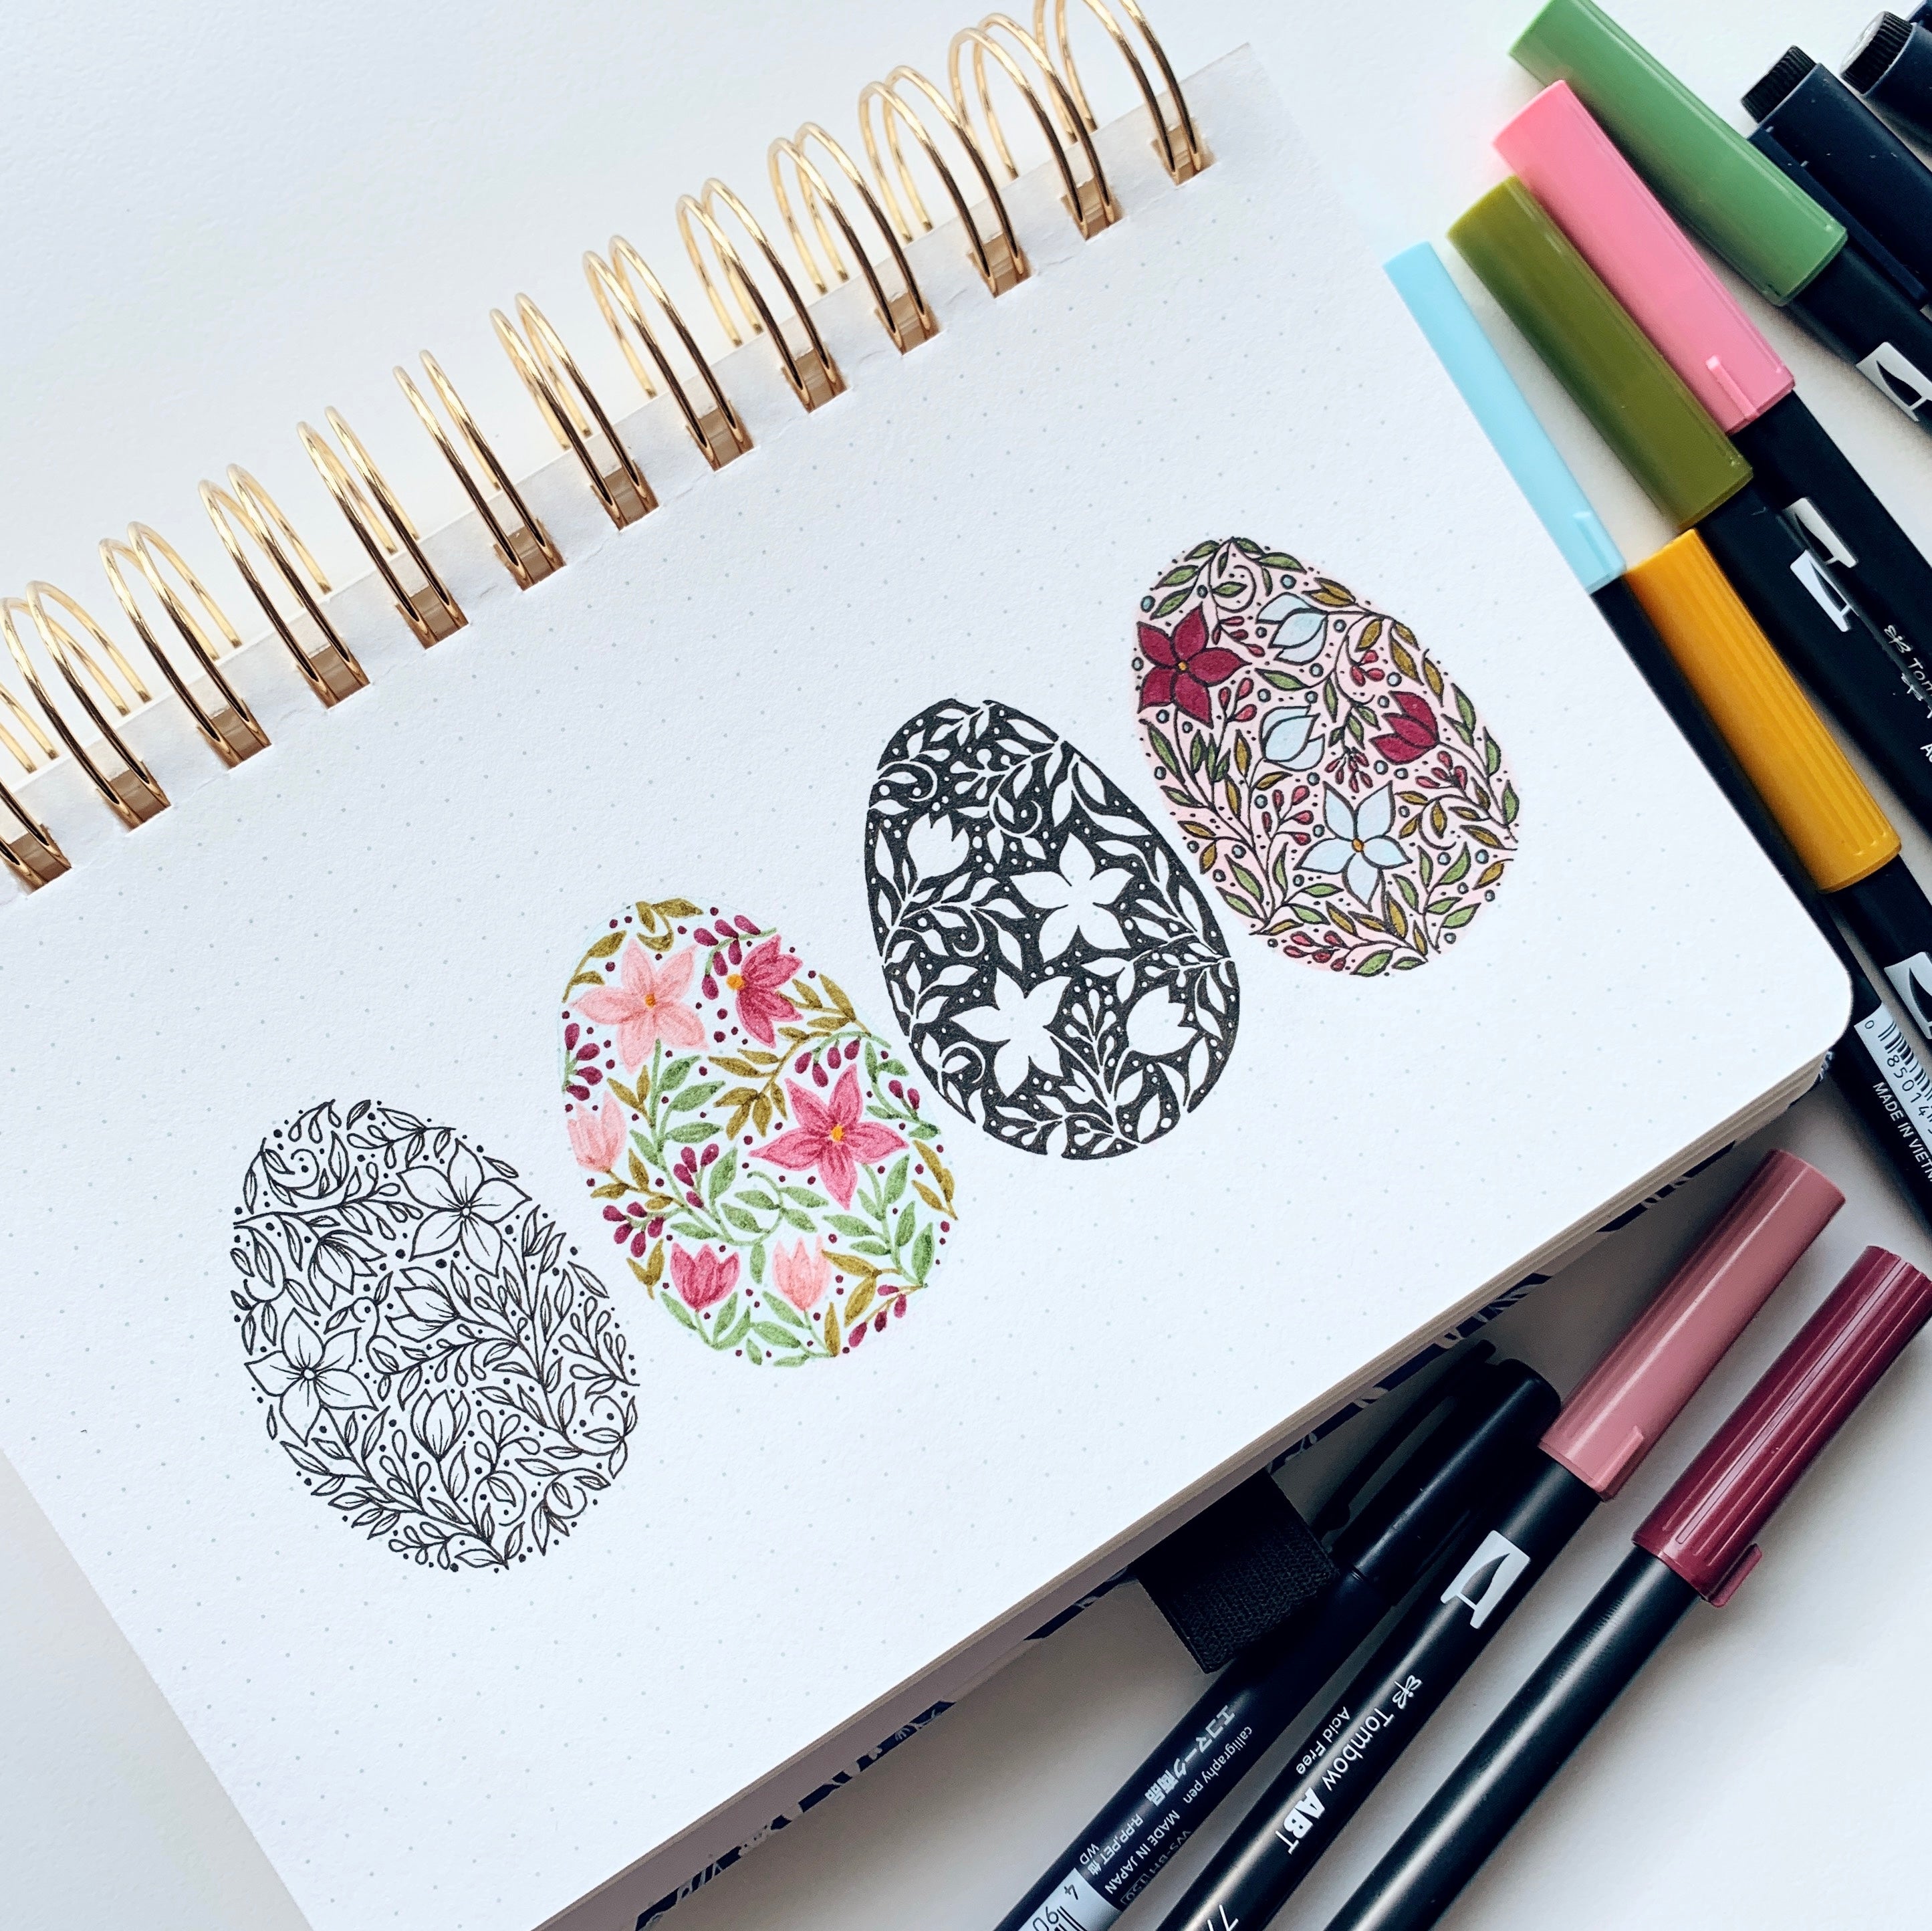 Learn four ways to decorate an Easter egg in your notebook with Adrienne from @studio80design!